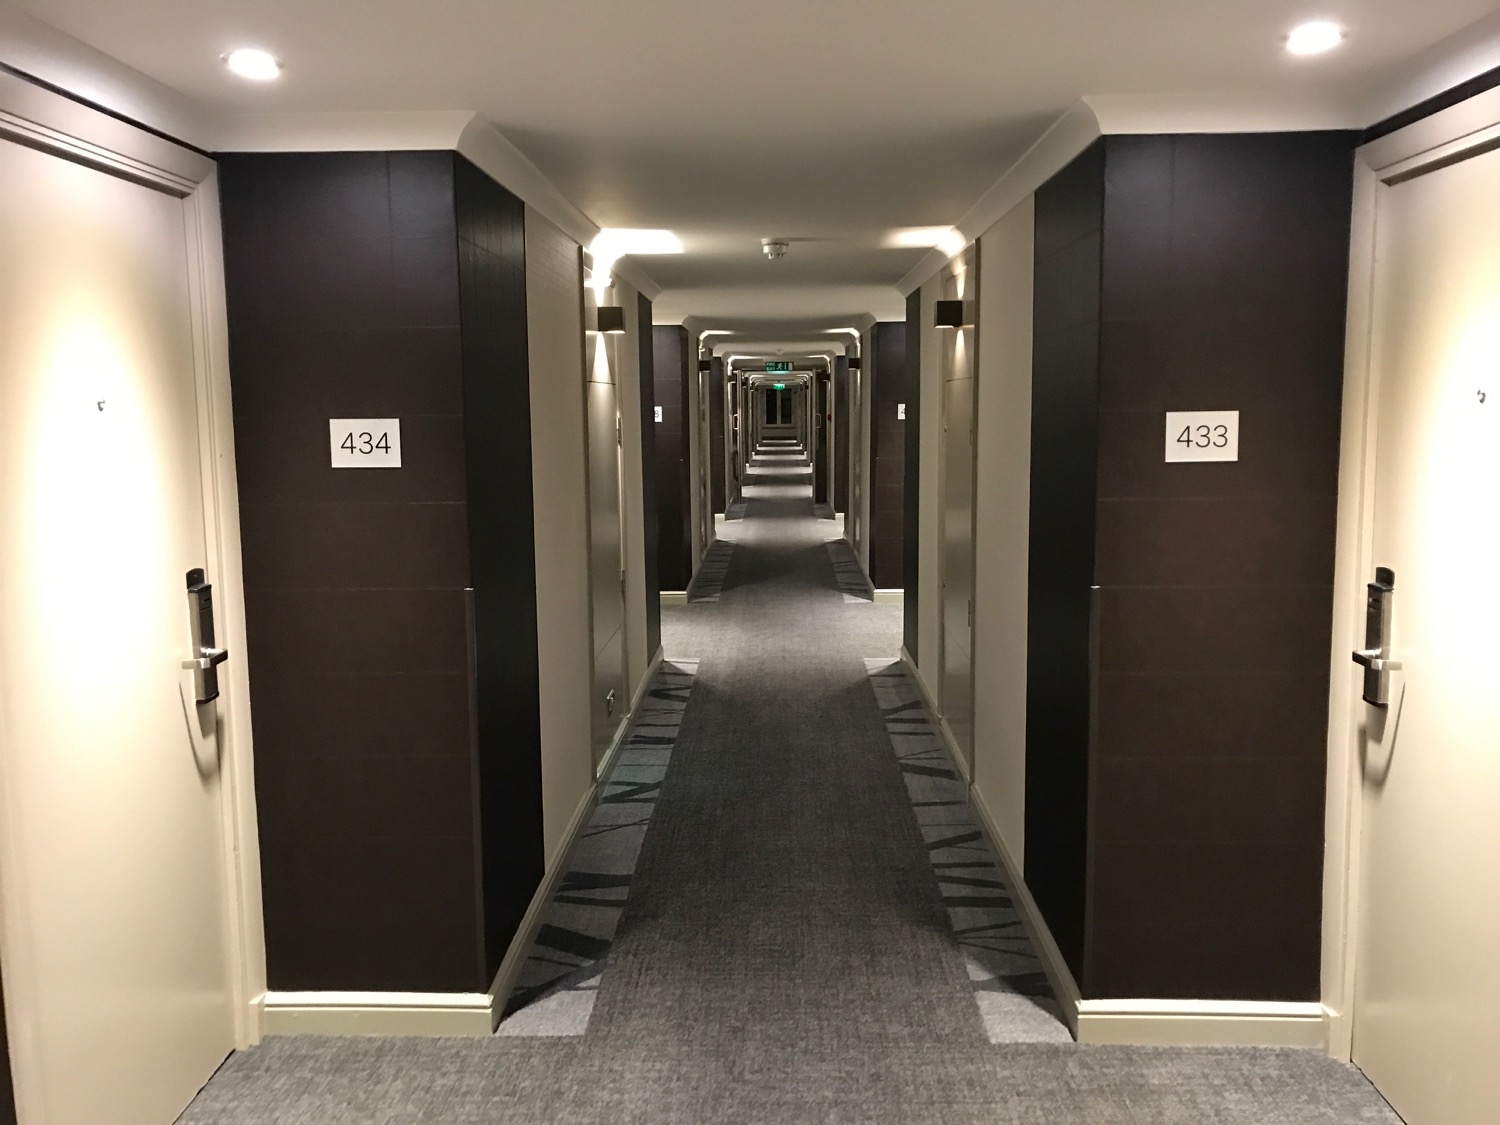 a hallway with a door and a number on the wall